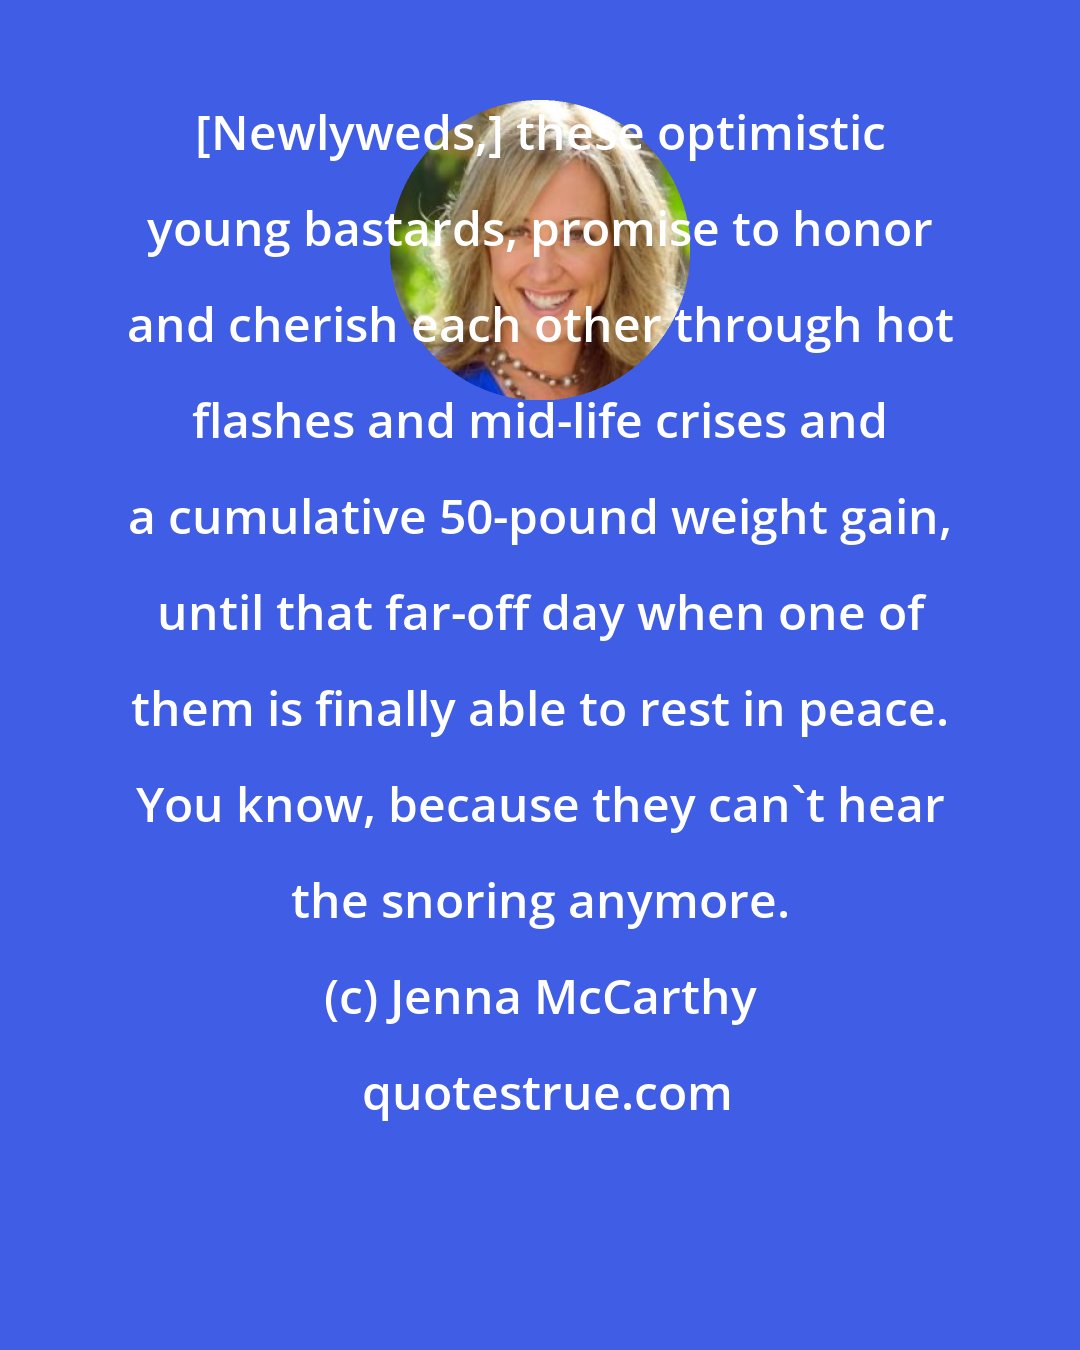 Jenna McCarthy: [Newlyweds,] these optimistic young bastards, promise to honor and cherish each other through hot flashes and mid-life crises and a cumulative 50-pound weight gain, until that far-off day when one of them is finally able to rest in peace. You know, because they can't hear the snoring anymore.